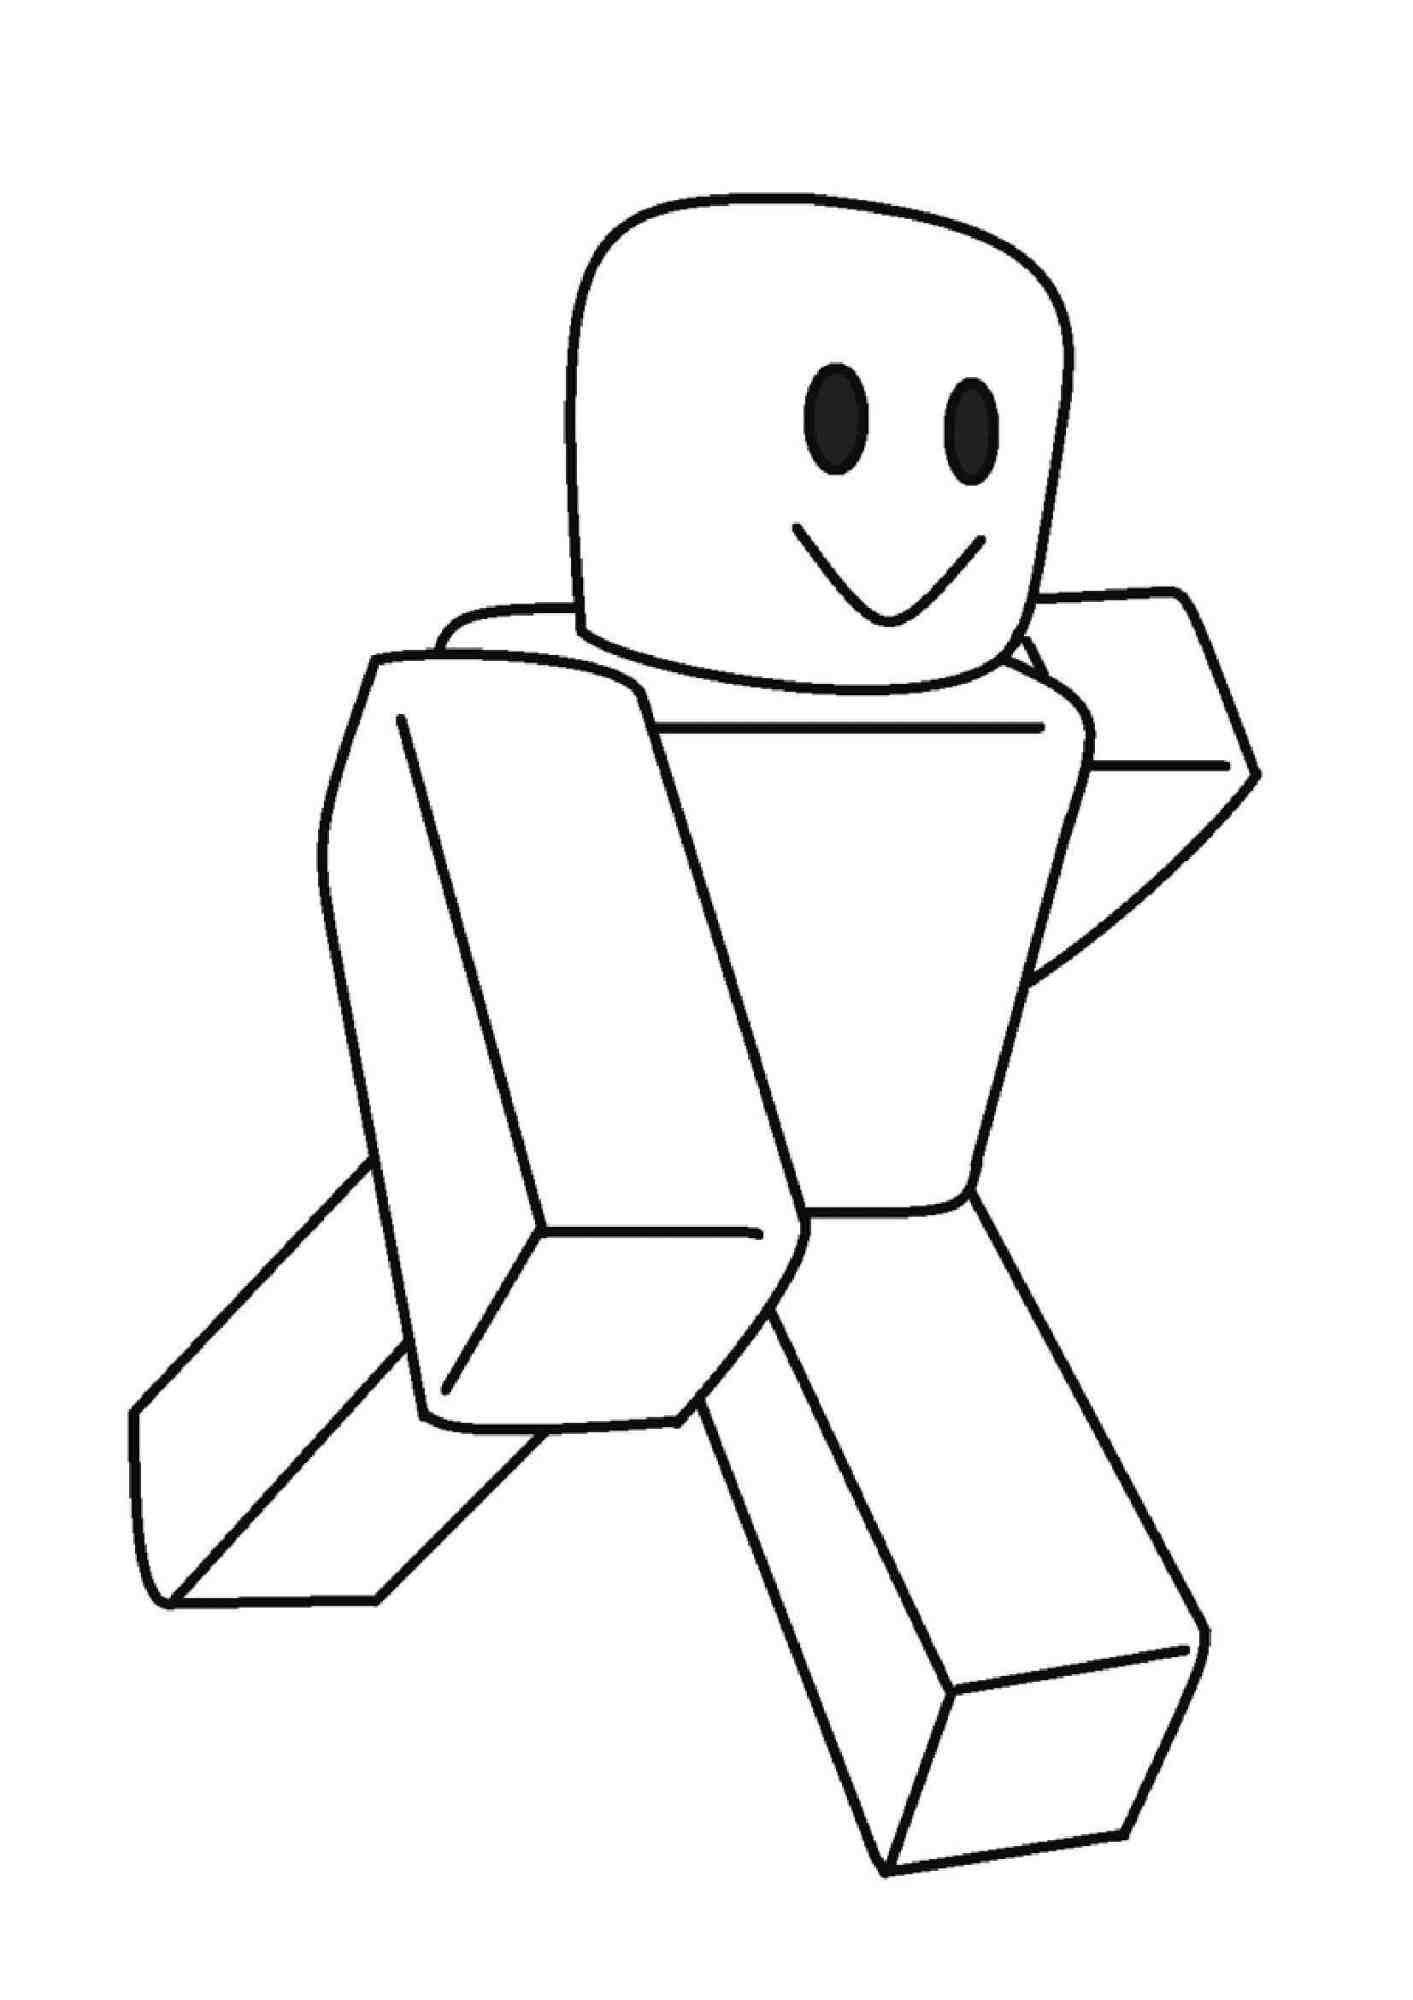 Roblox Noob runs very fast Coloring Pages Roblox Coloring Pages